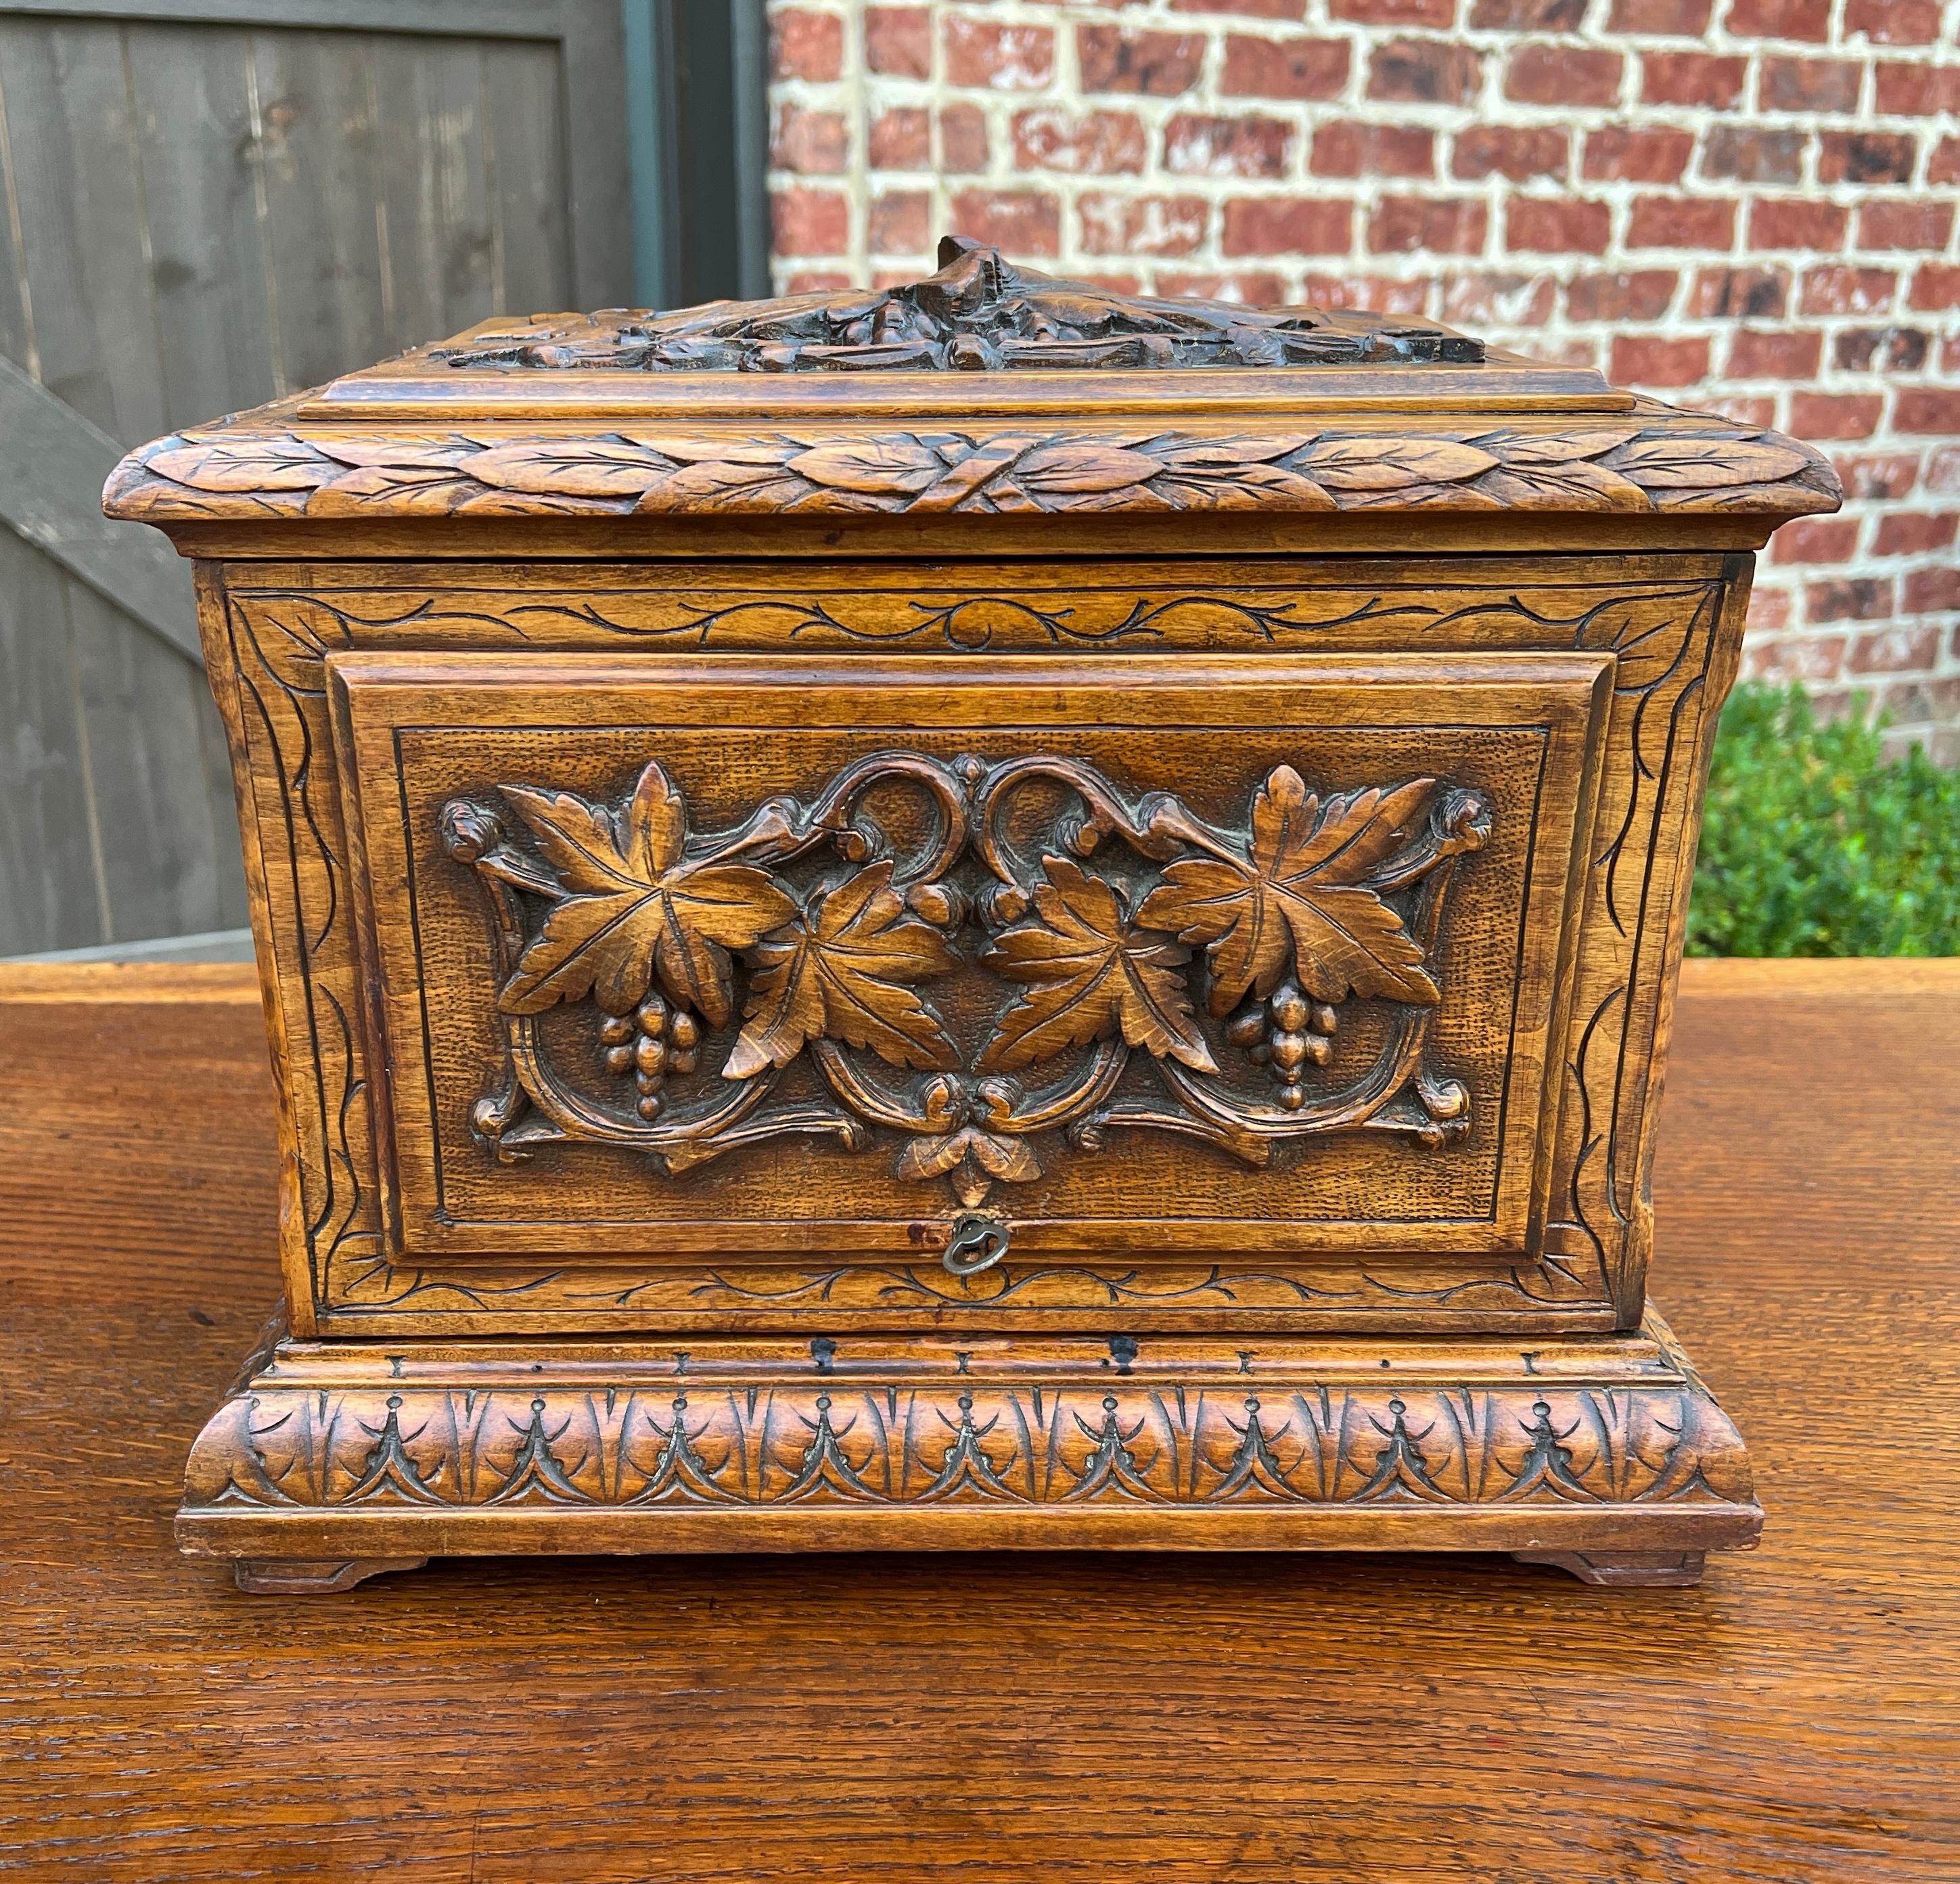 Exquisite 19th century Antique French Walnut Black forest Jewelry Accessory Box
~~circa 1880s 

Black Forest decorative pieces were very popular in late 19th century France~~often characterized by highly carved game such as rabbits, pheasants,